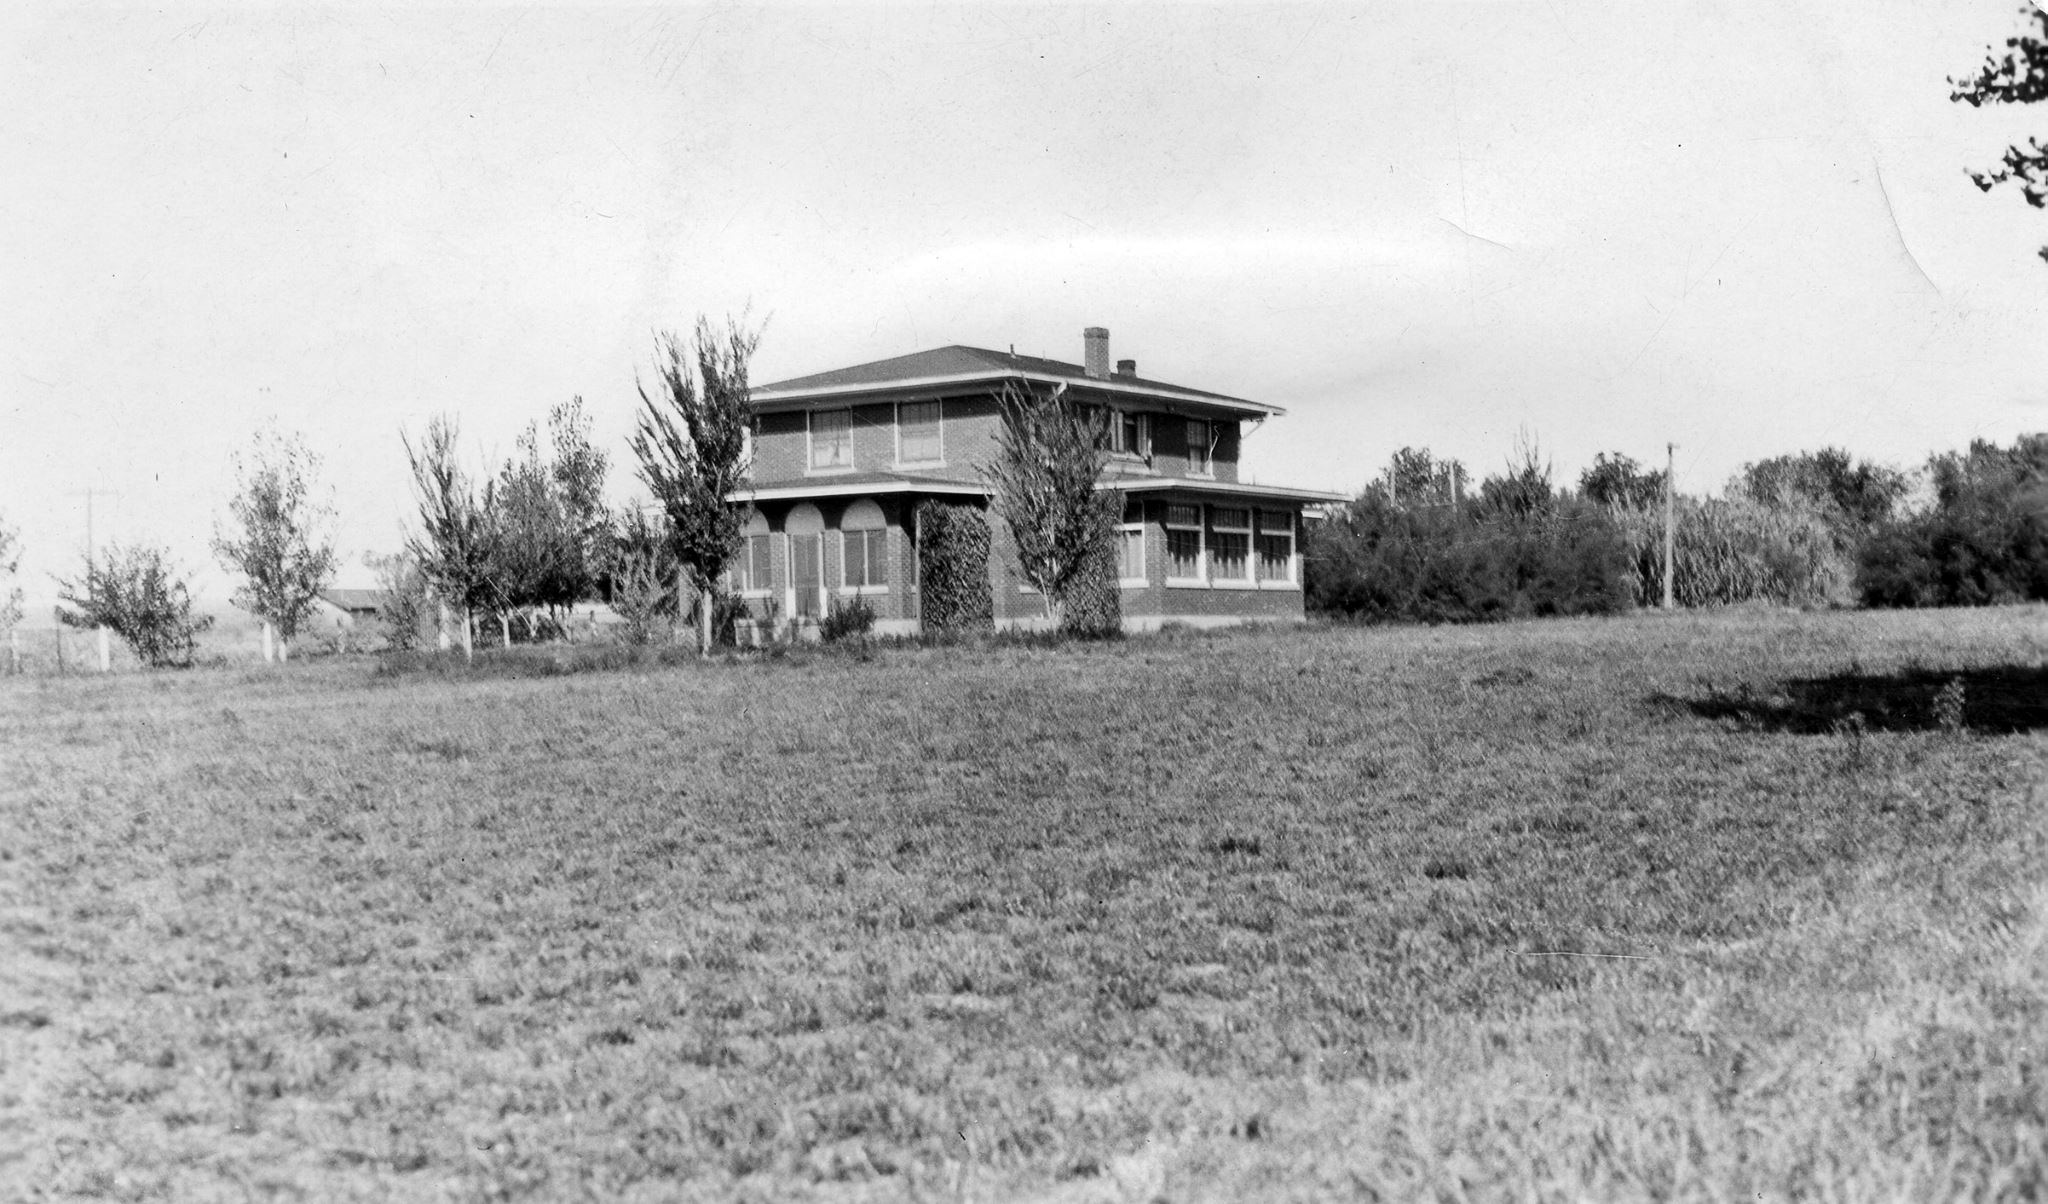 Black and White photo of the Nason House in 1923